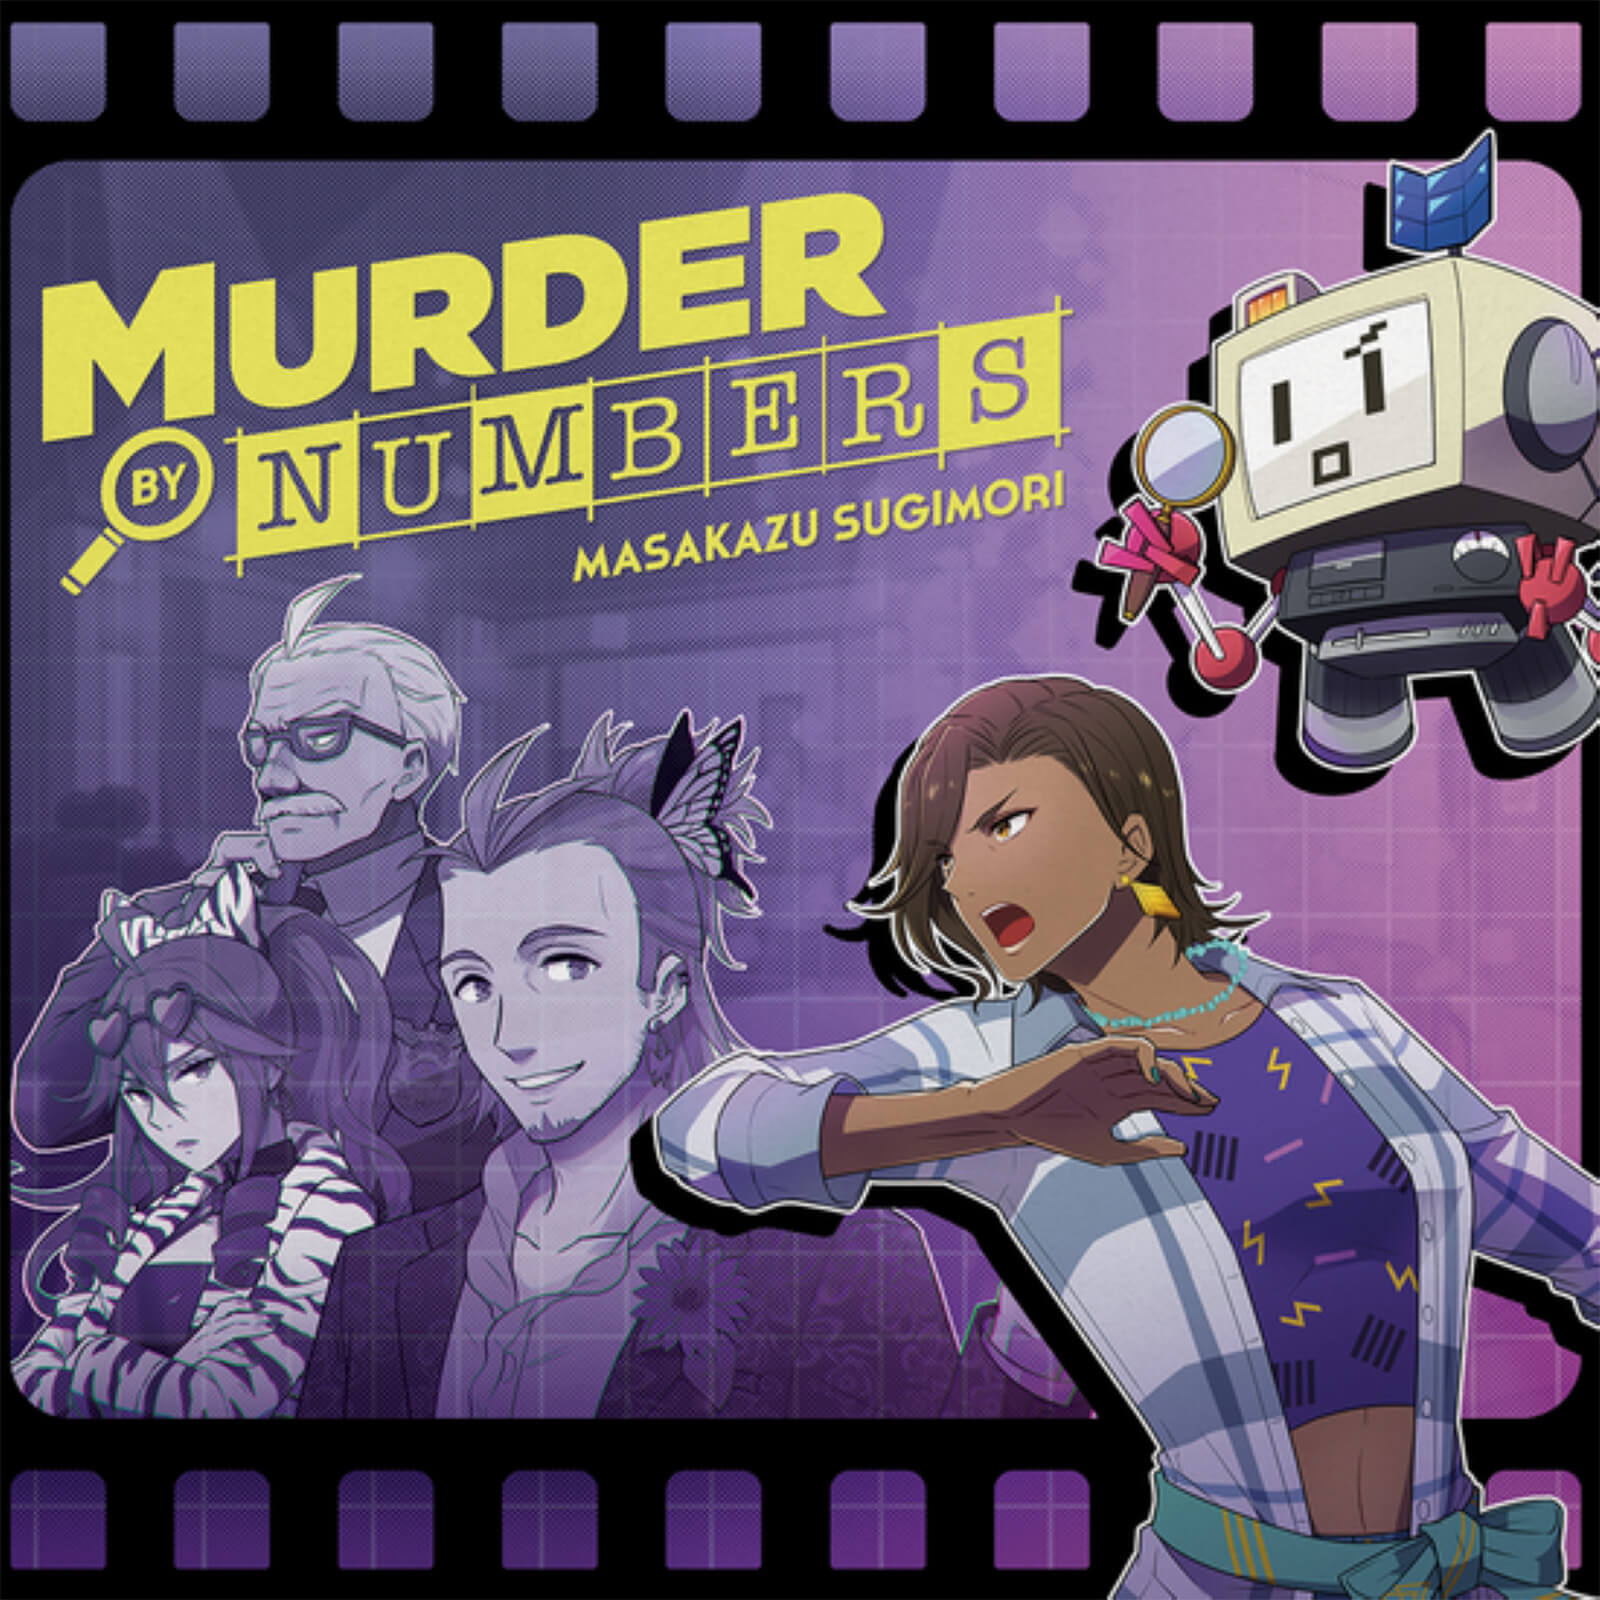 Black Screen Records - Murder by numbers (original video game soundtrack) 2xlp (purple & yellow)